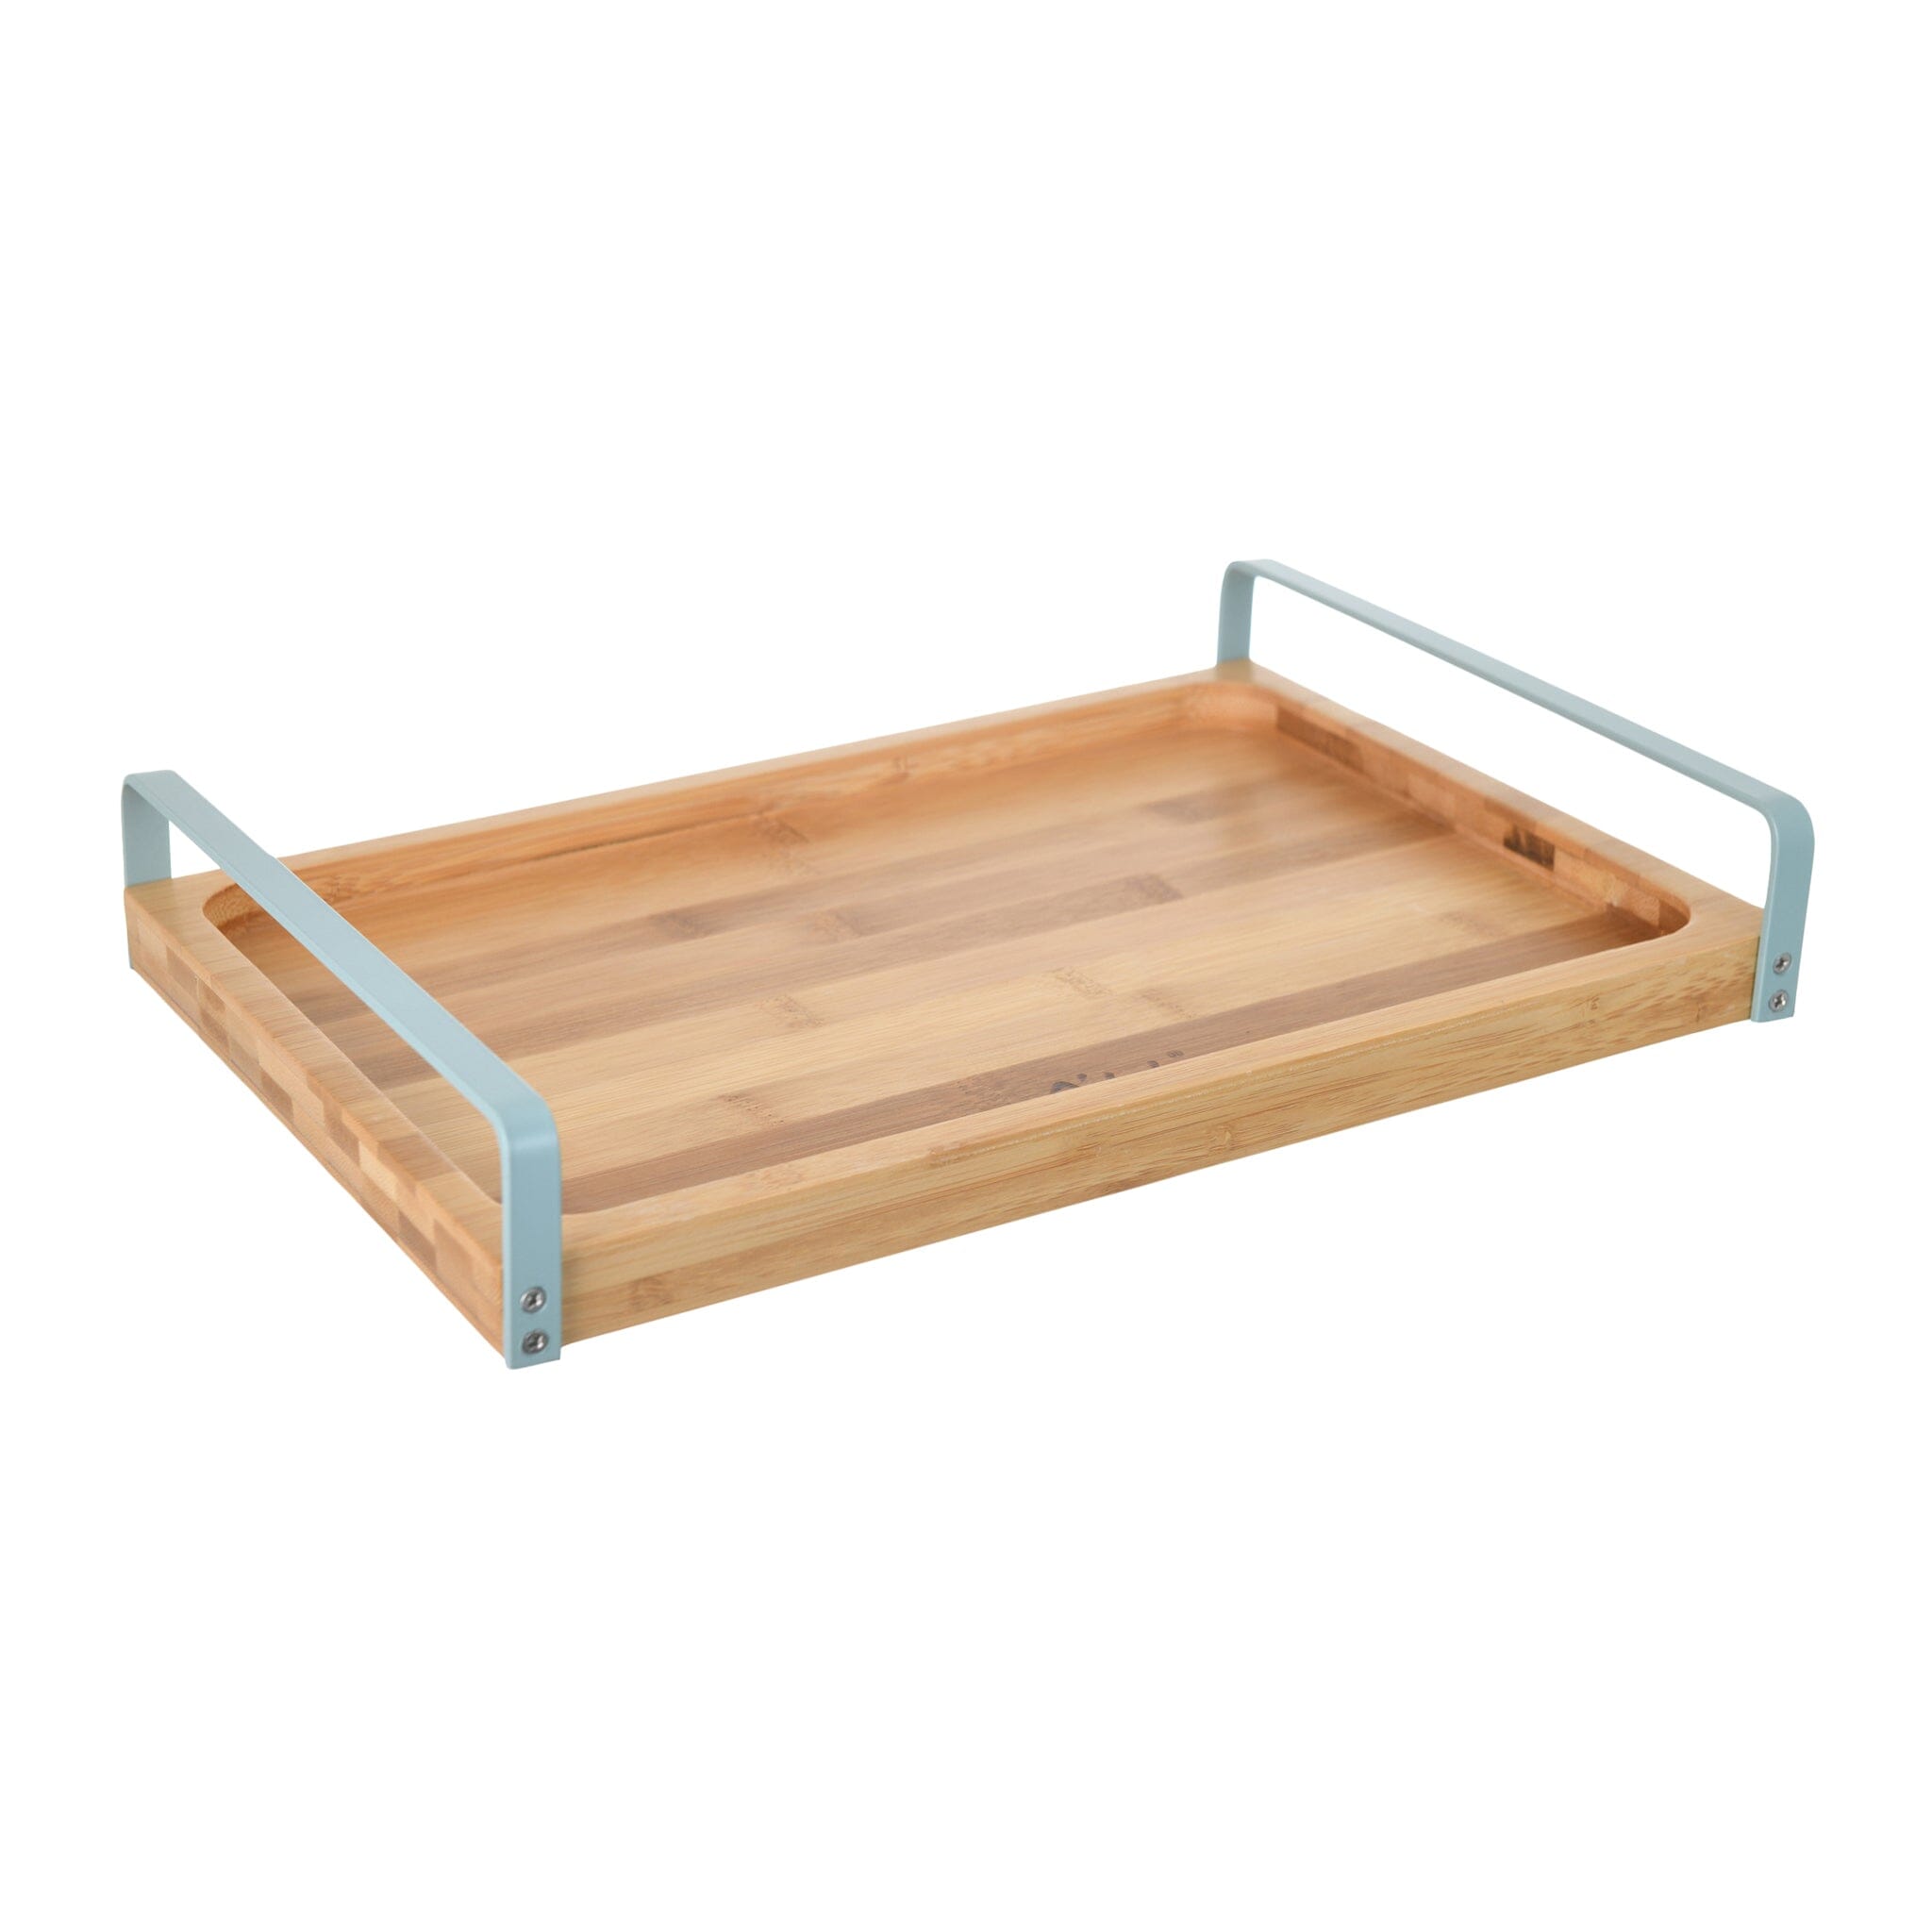 O'lala - Rectangular Wooden Tray With Metal Handle - Light Blue - 24x34cm - 520008171